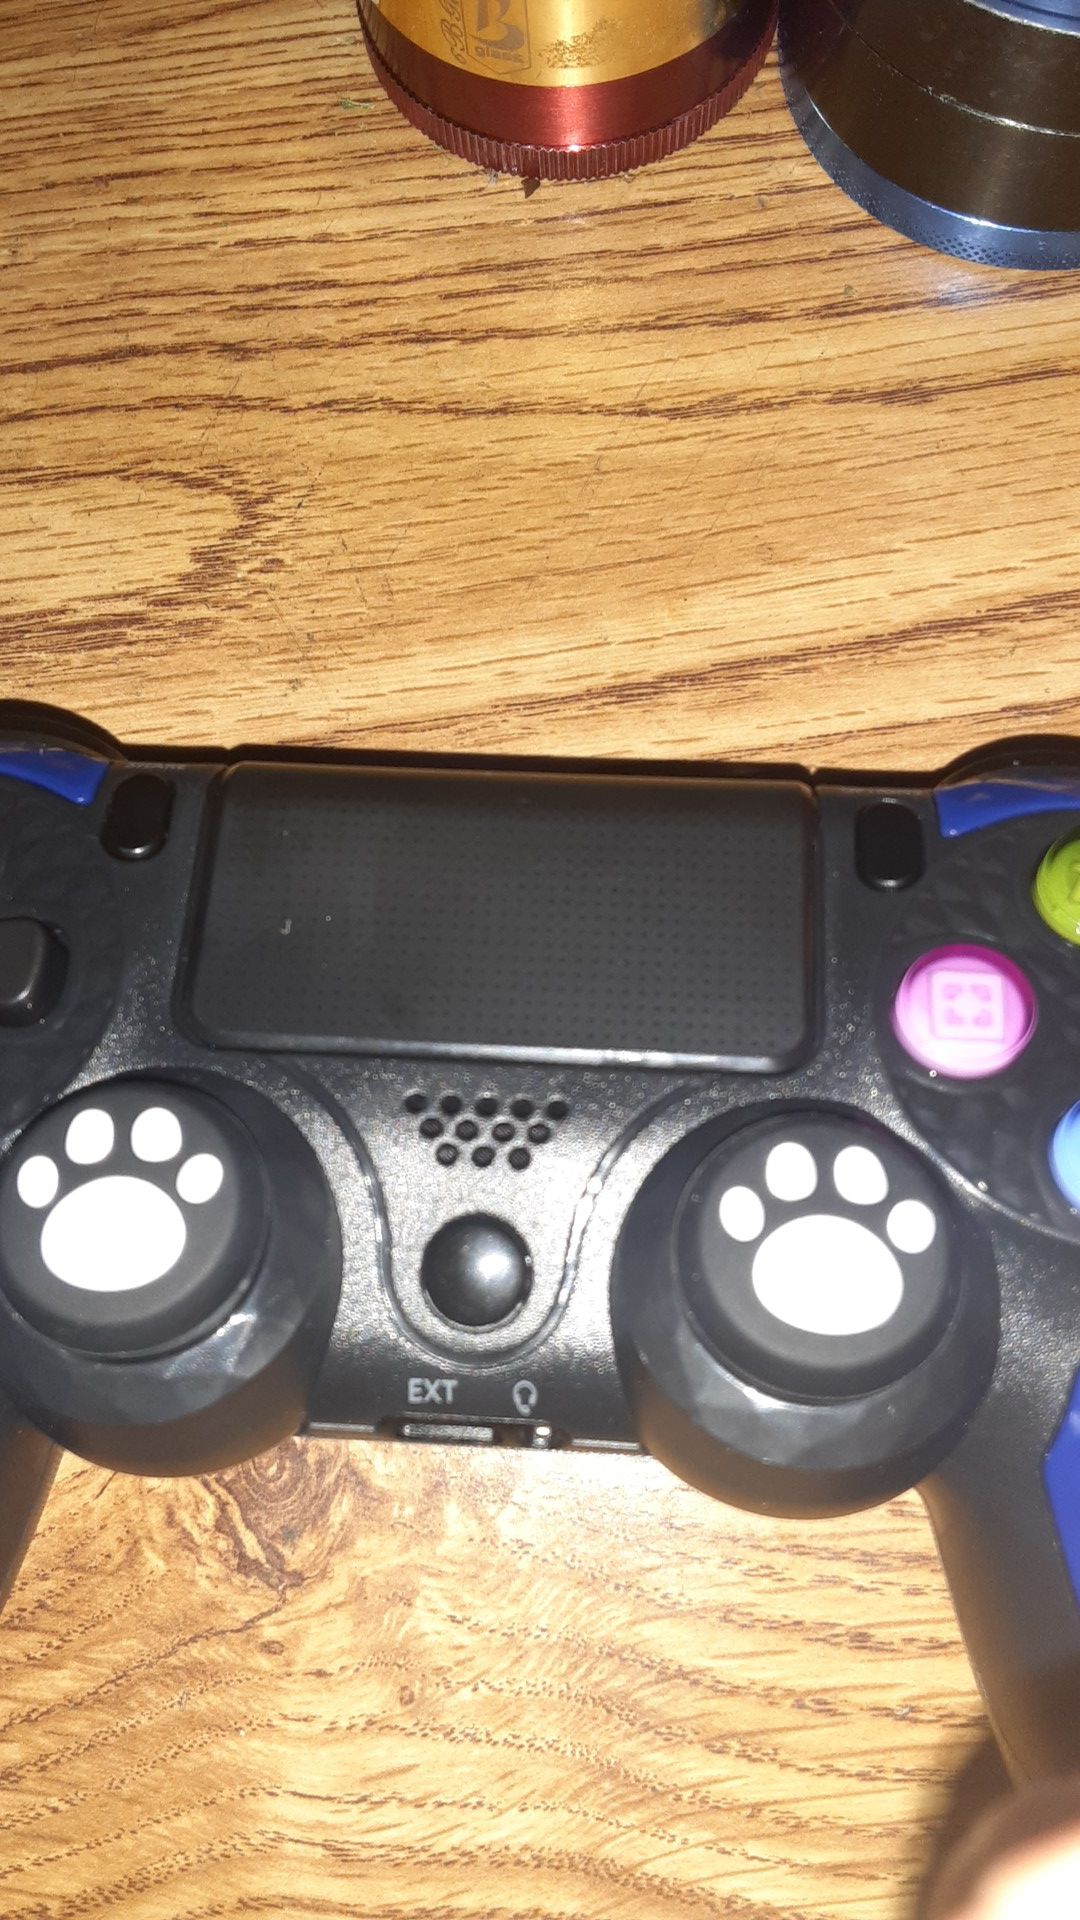 3rd party controller